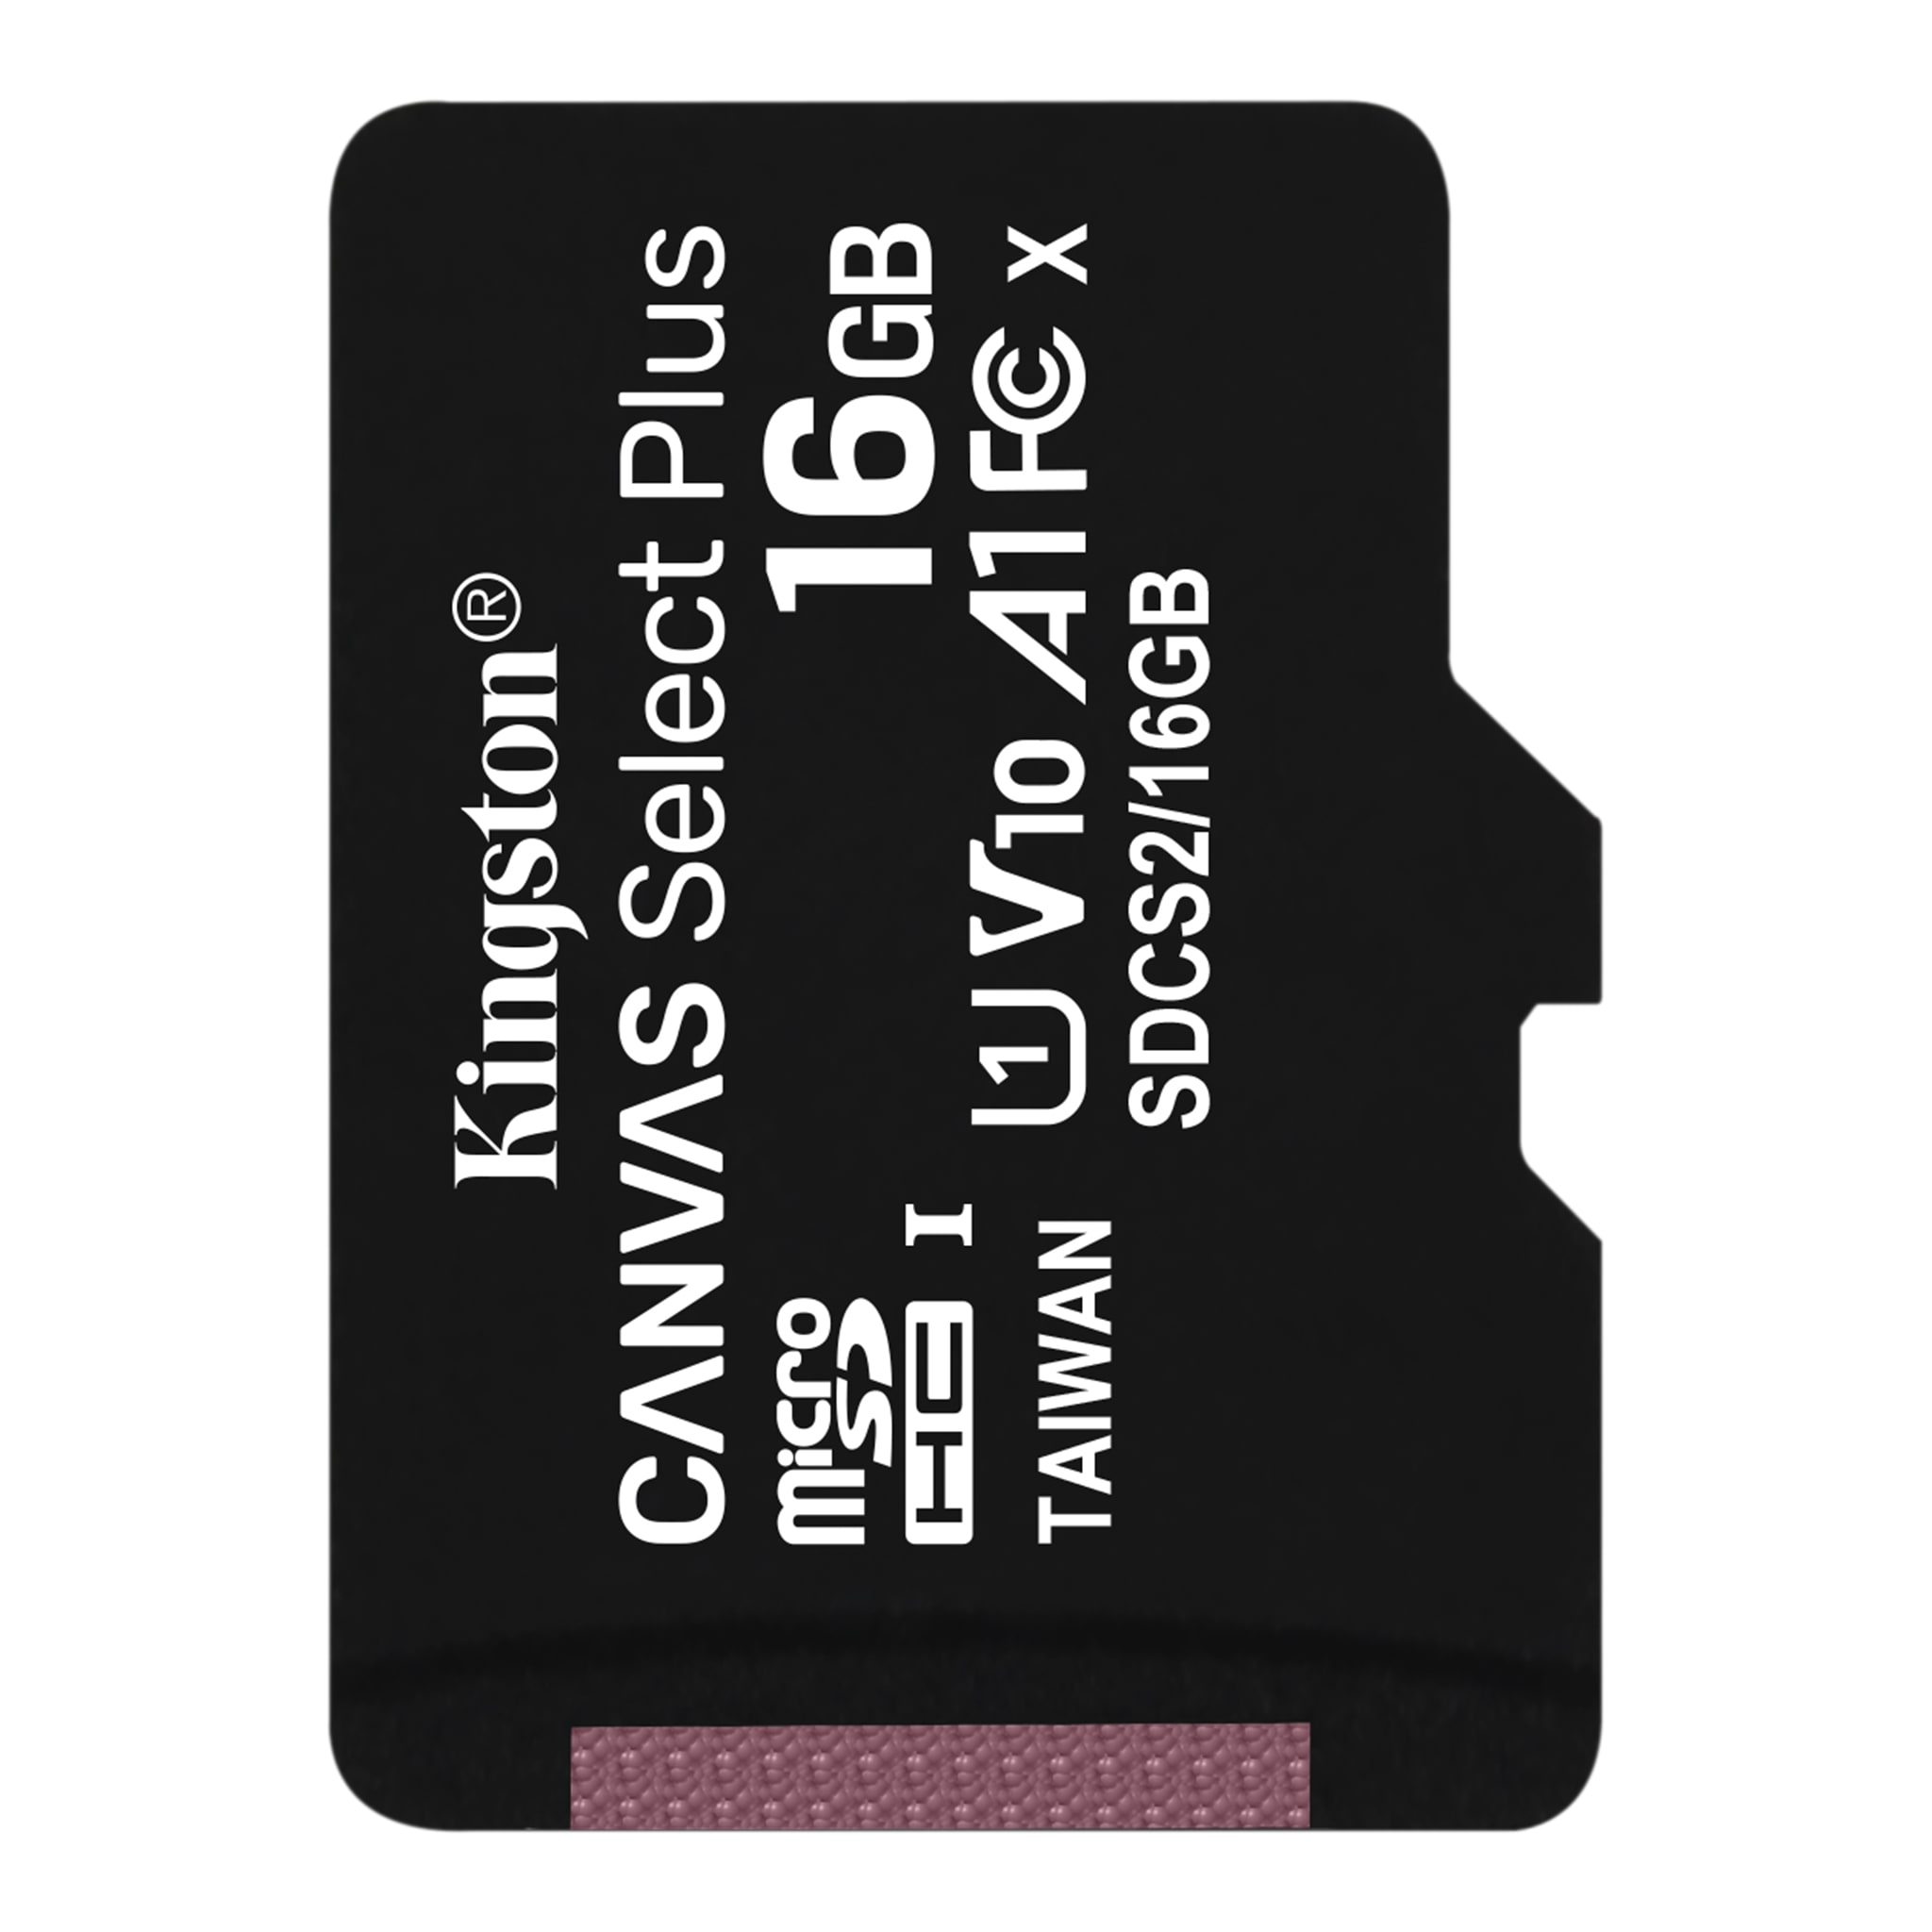 MicroSDXC Canvas Select Plus Card Verified by SanFlash. Kingston 64GB Videocon Delite 11 100MBs Works with Kingston